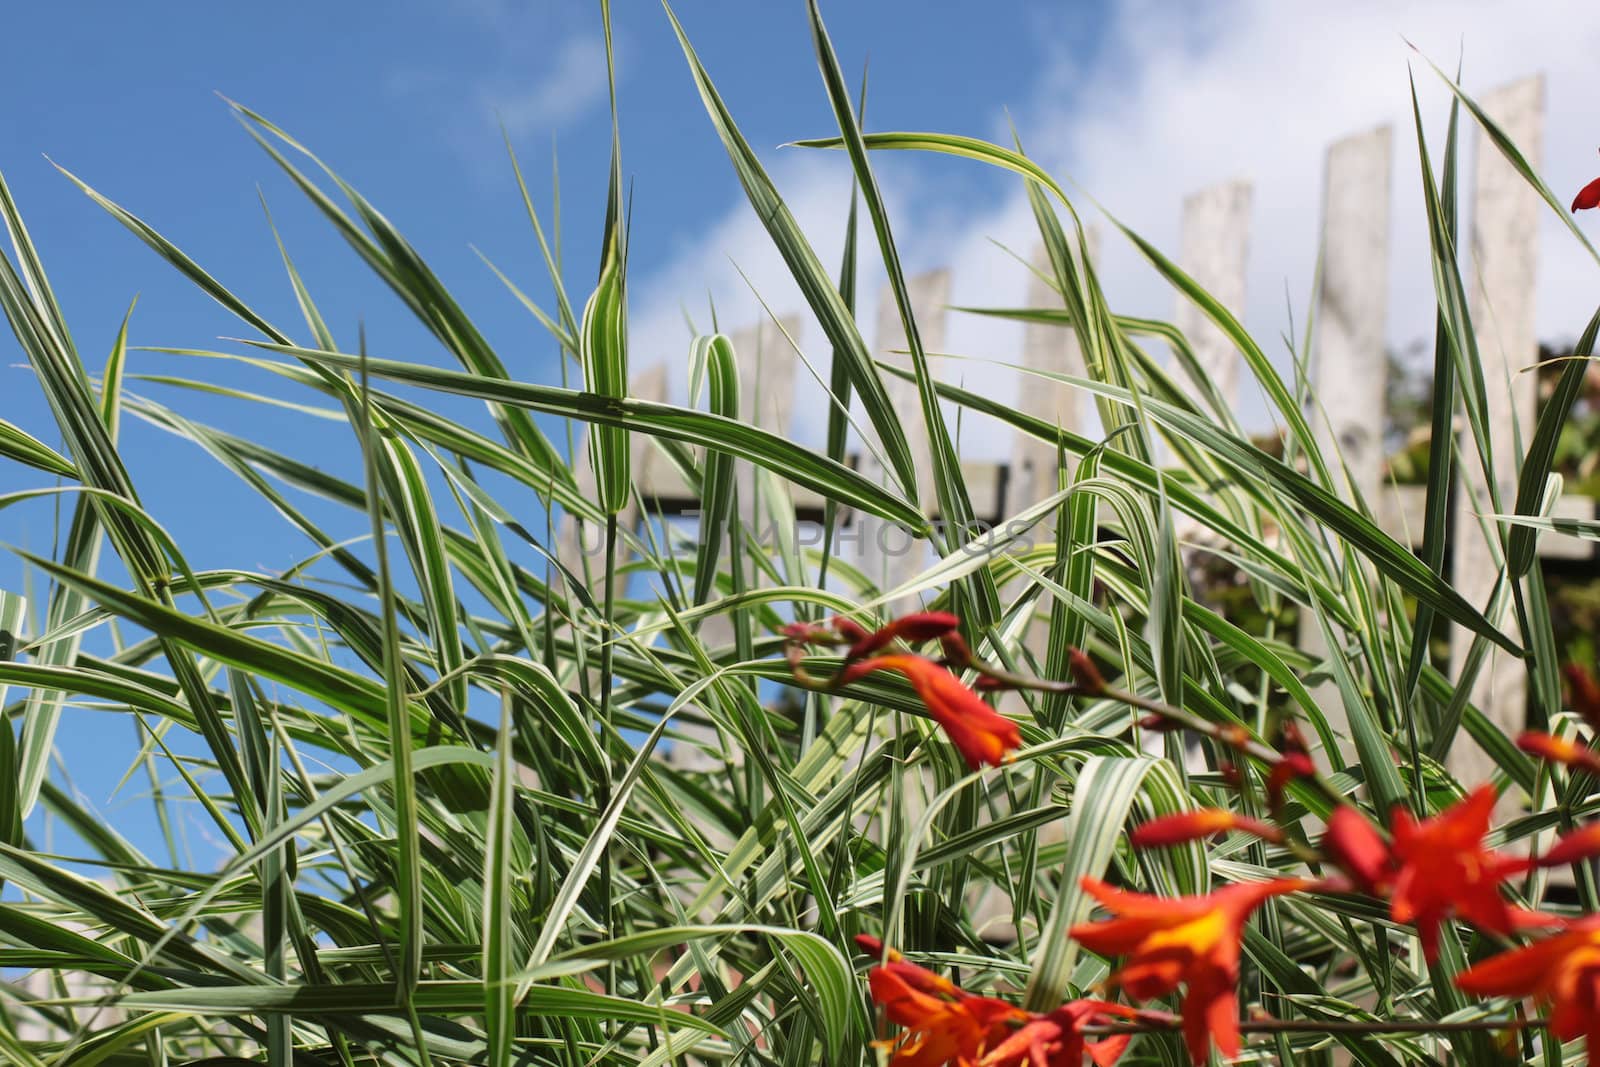 Crocosmia, a small orange flowering plant in the iris family, Iridaceae, in soft focus growing in front of some ornamental grasses. Set on a portrait format against a blue sky background with white clouds.